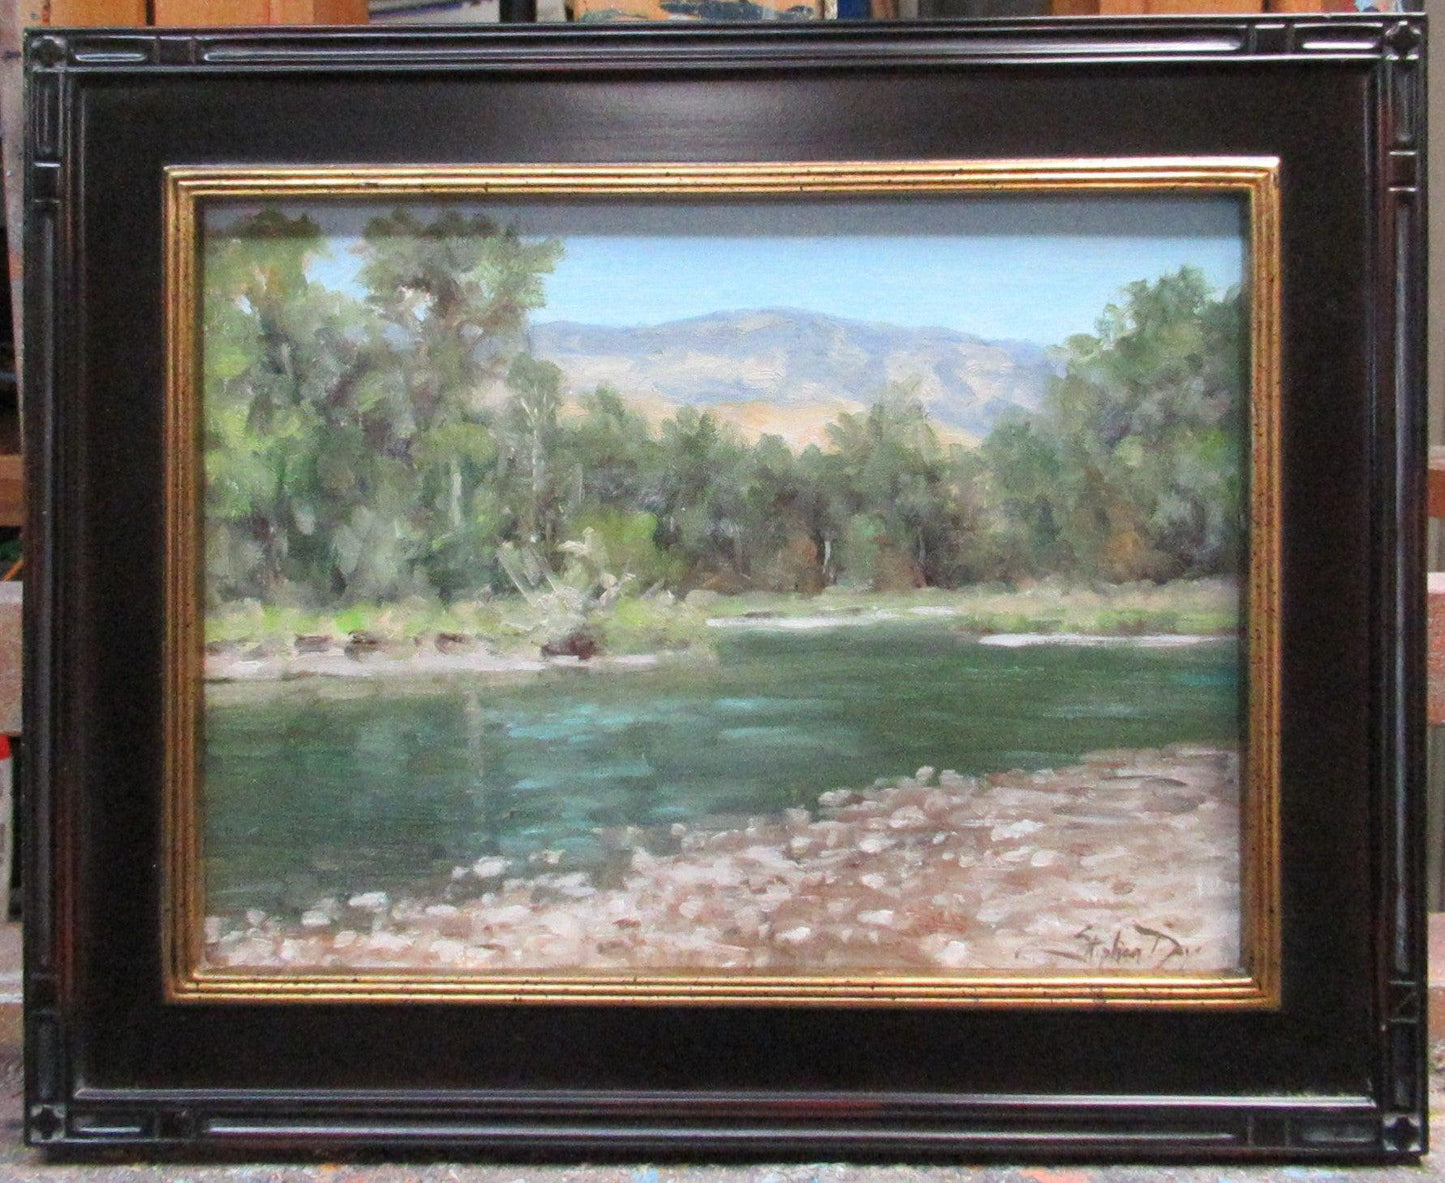 Along the Missouri River - Montana-Painting-Stephen Day-Sorrel Sky Gallery